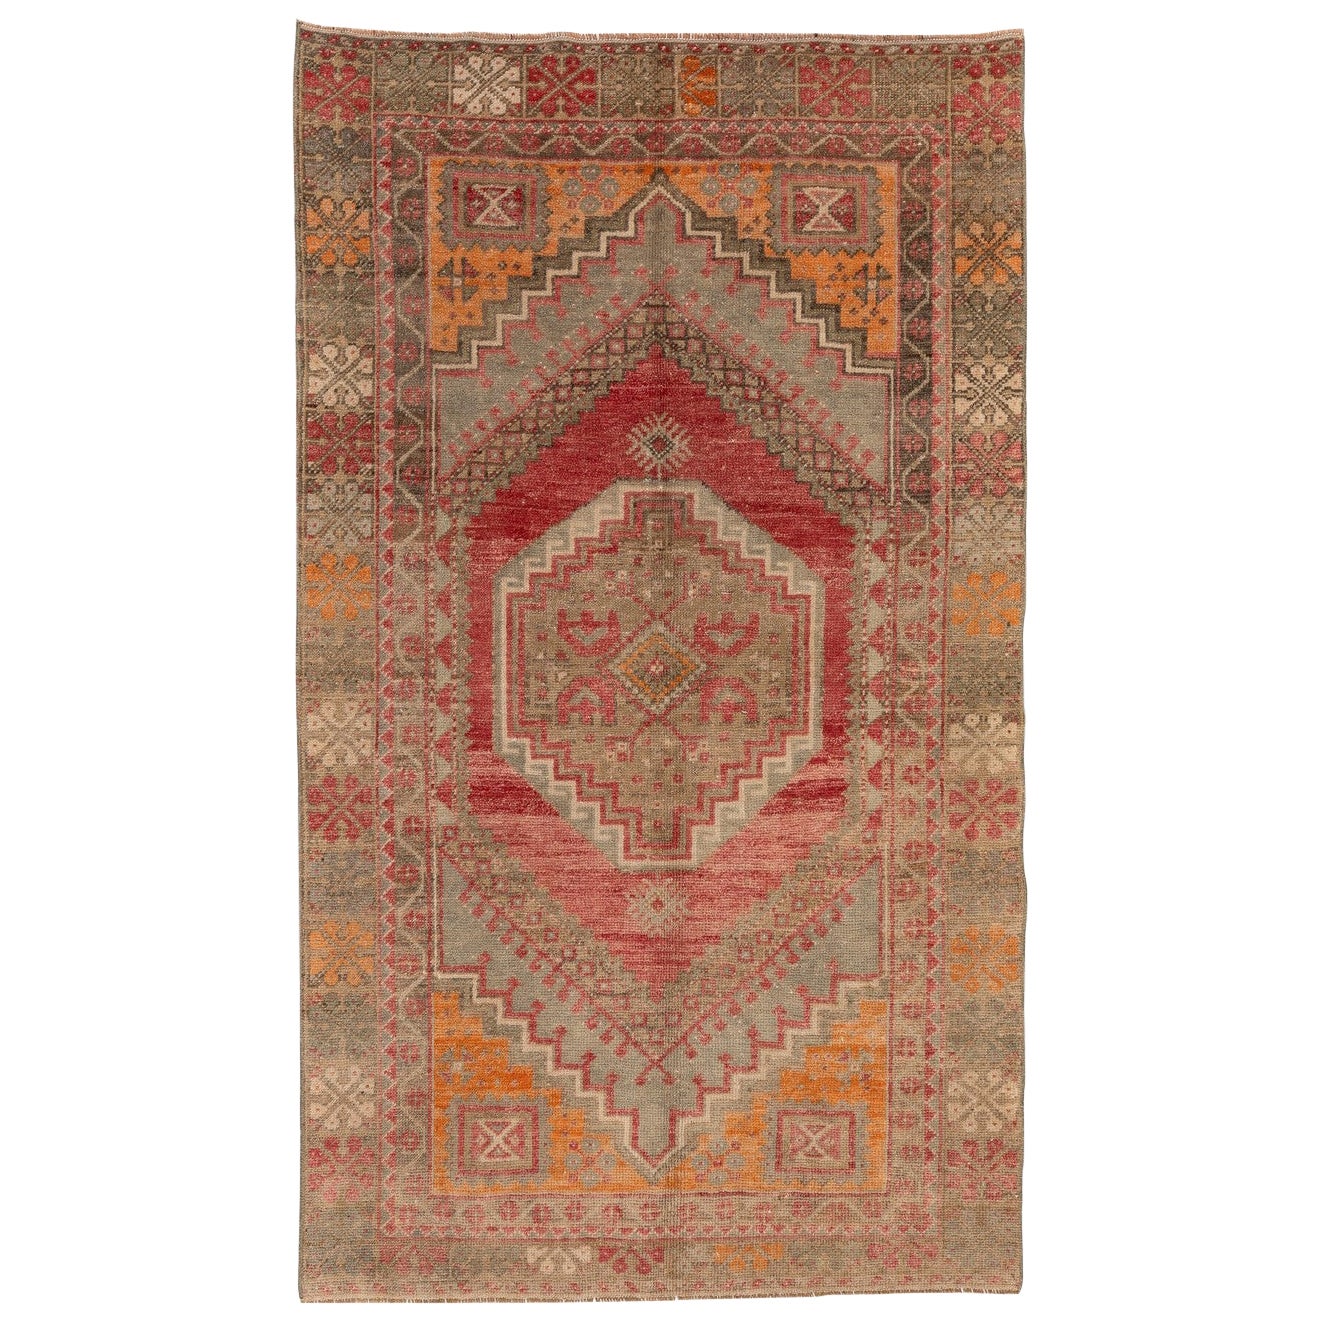 3.6x6 Ft 1950s Turkish Rug with Soft Wool Pile in Warm Red, Orange Gray Colors